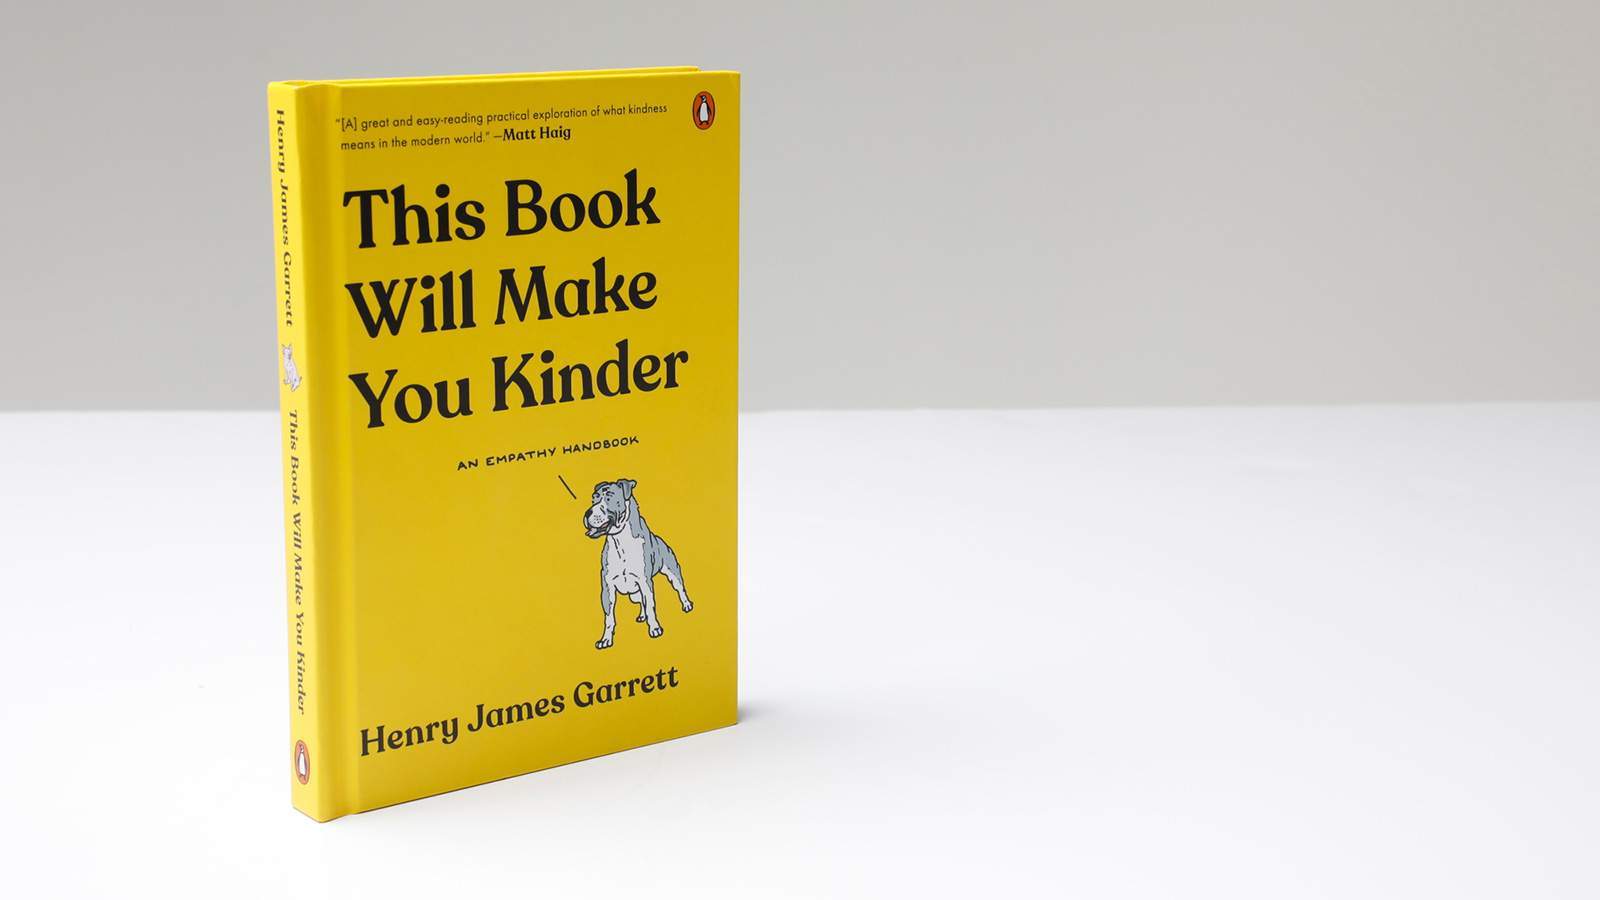 photo of the common reading book, "This Book Will Make You Kinder"